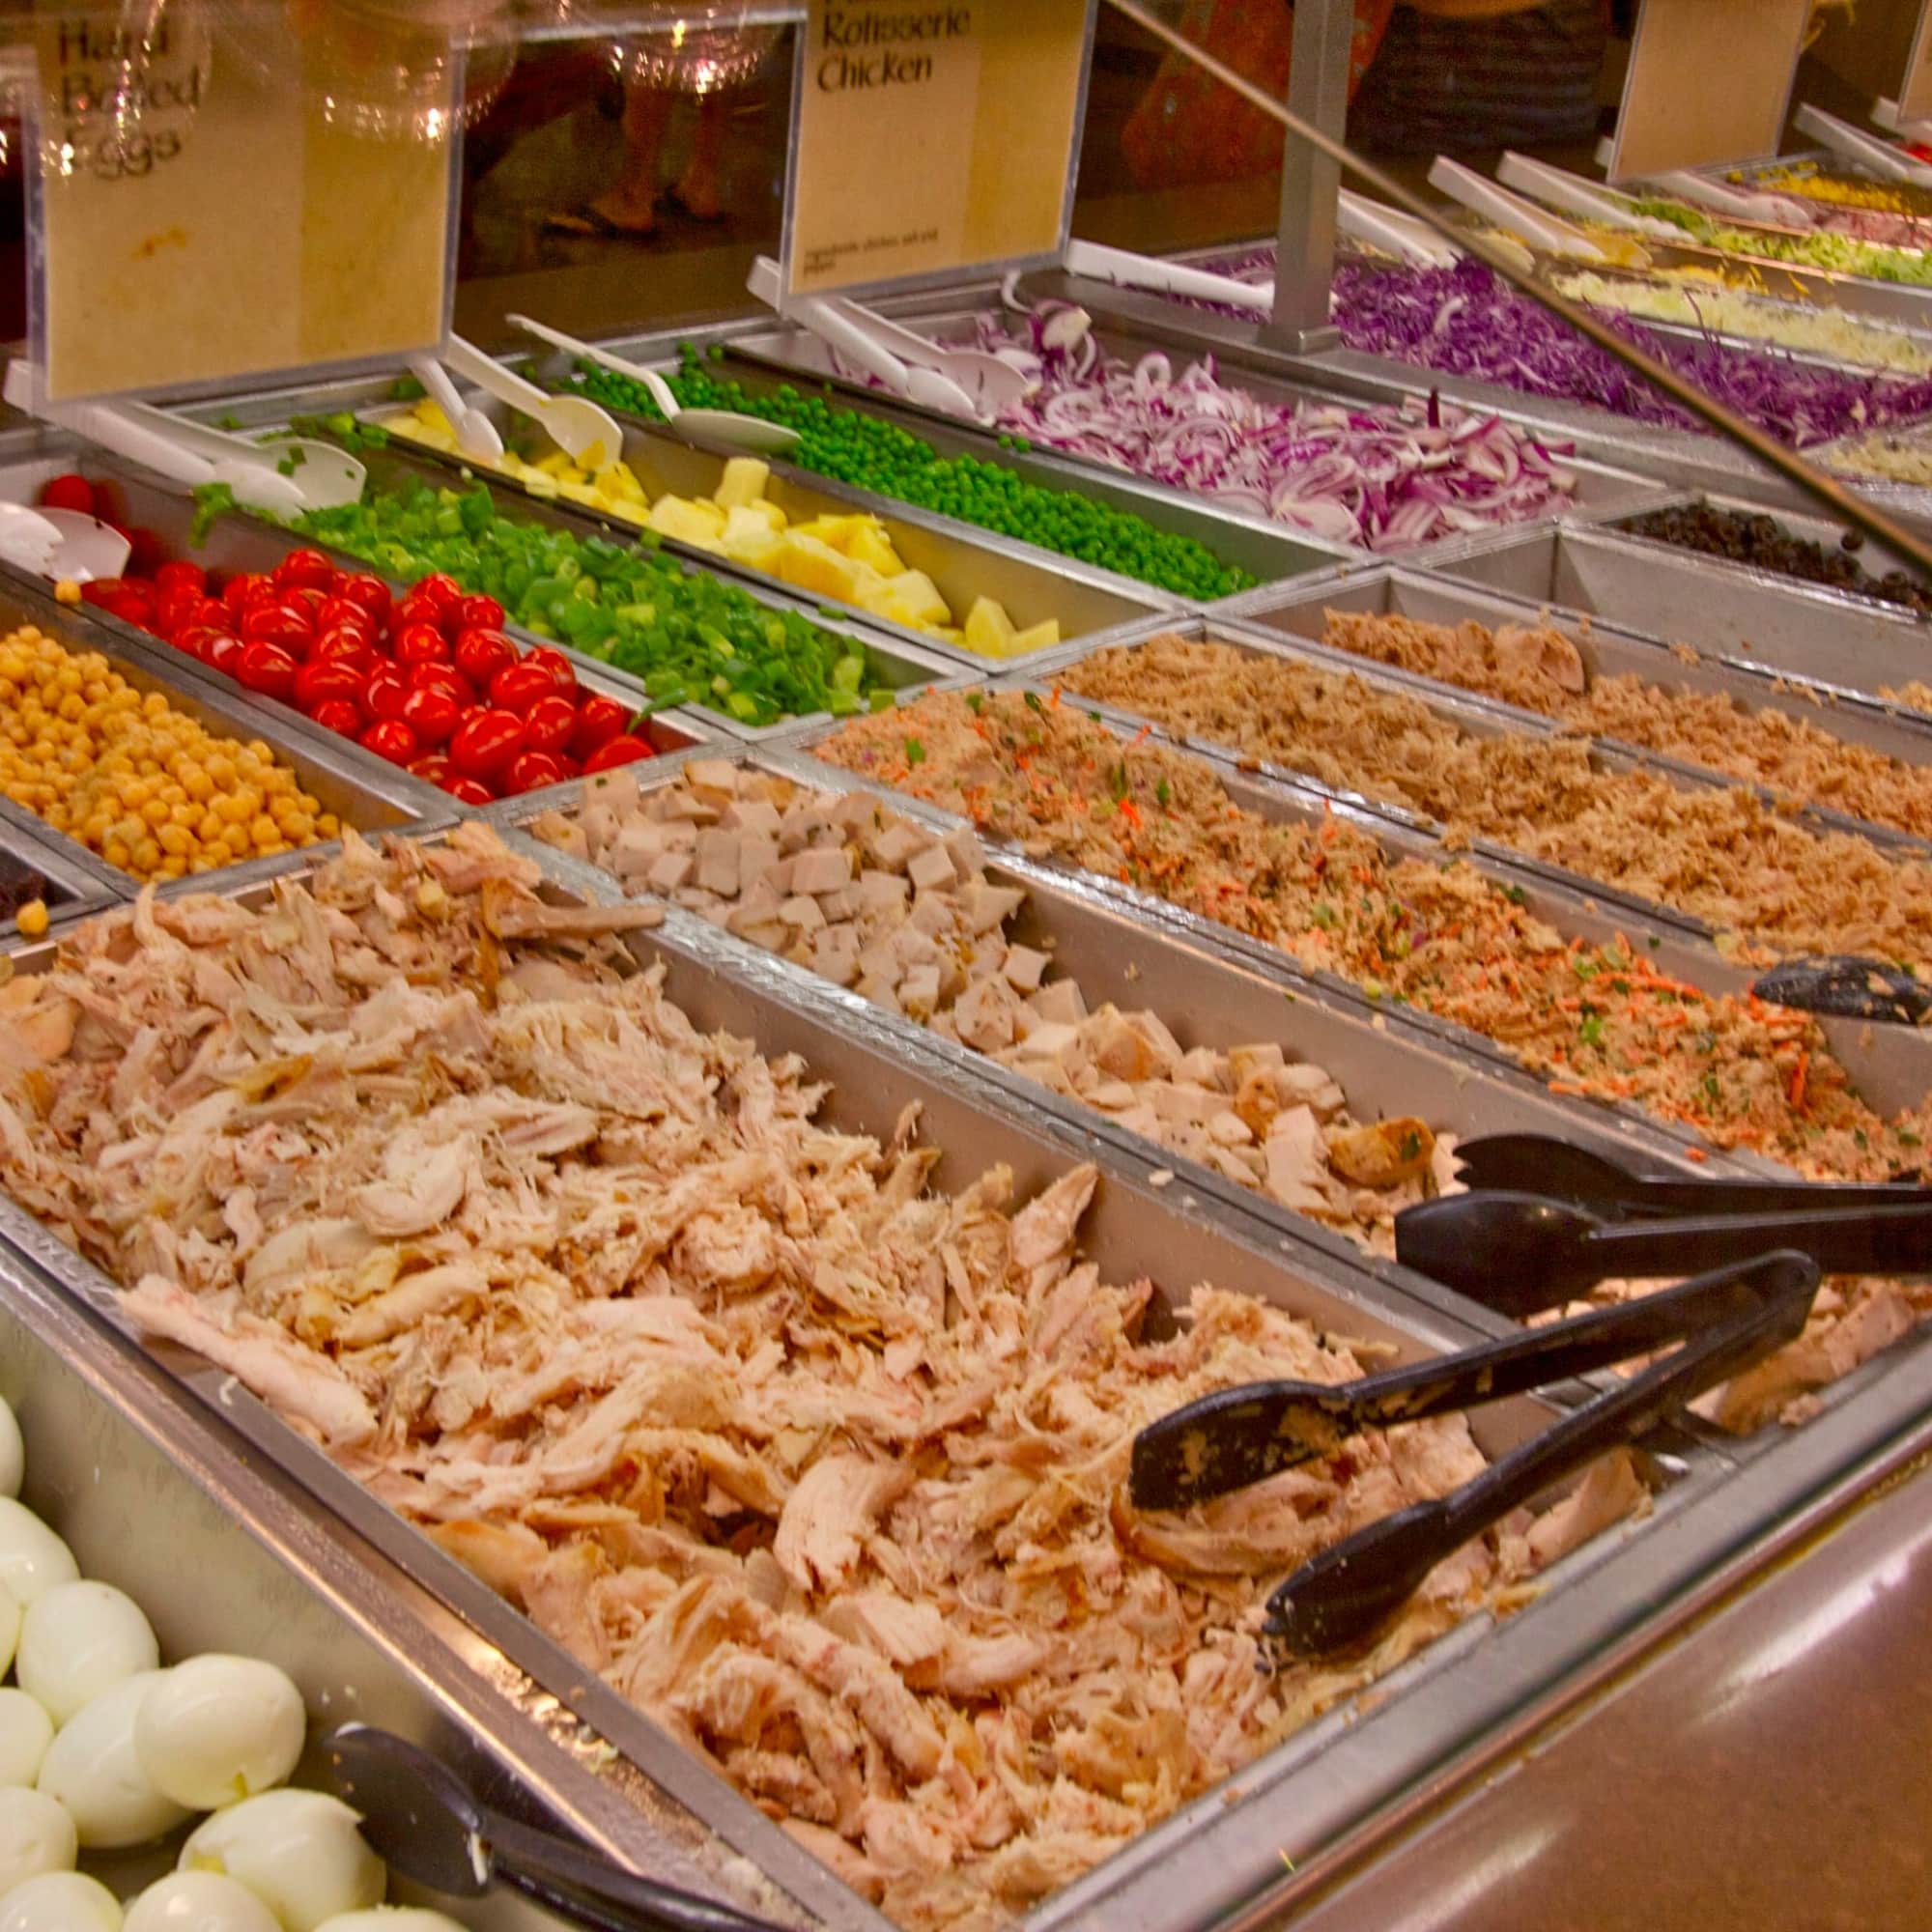 Whole Foods: How I Build a Healthy Meal at the Hot Bar